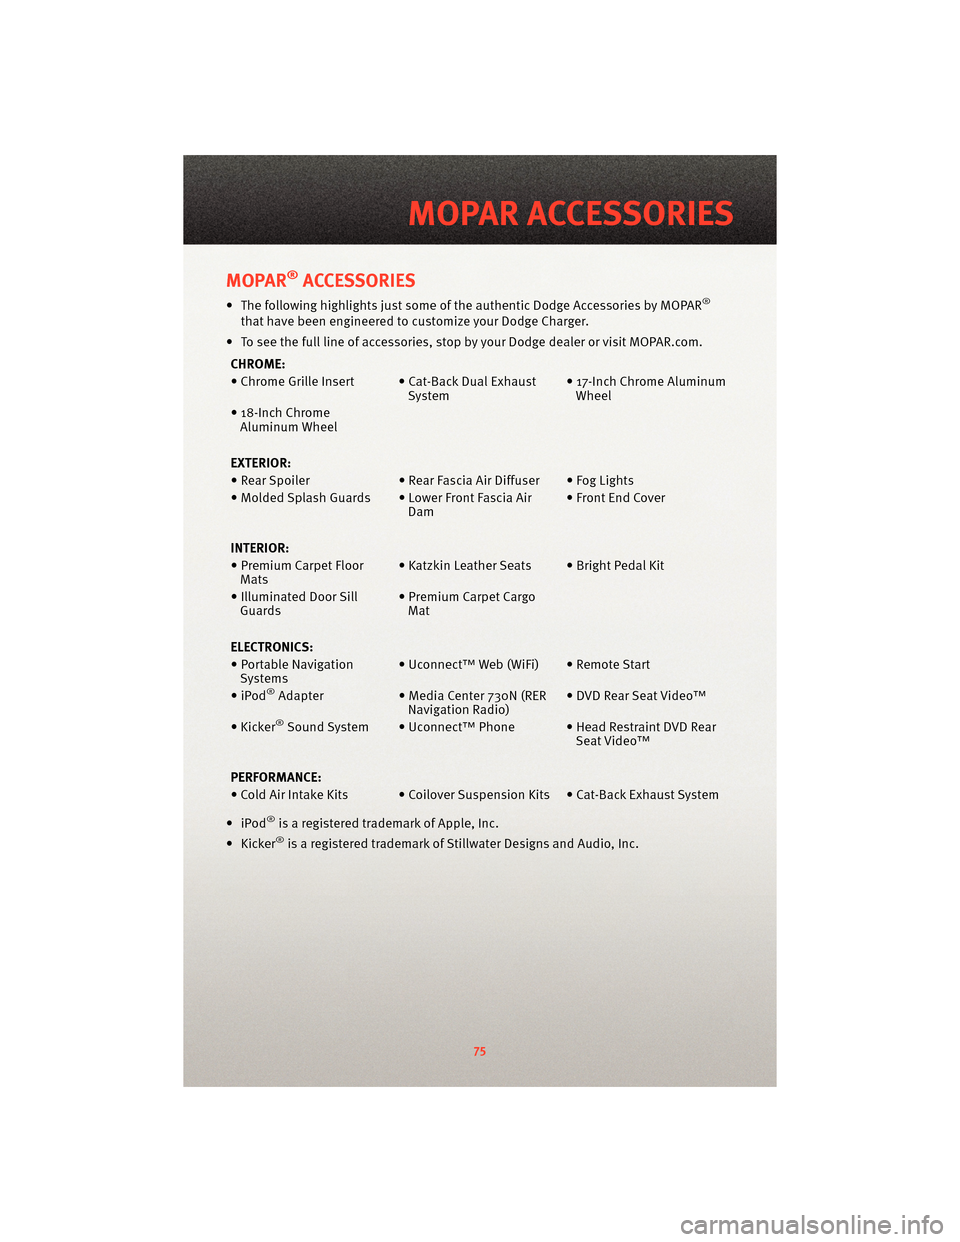 DODGE CHARGER 2010 7.G User Guide MOPAR®ACCESSORIES
• The following highlights just some of the authentic Dodge Accessories by MOPAR®
that have been engineered to customize your Dodge Charger.
• To see the full line of accessori